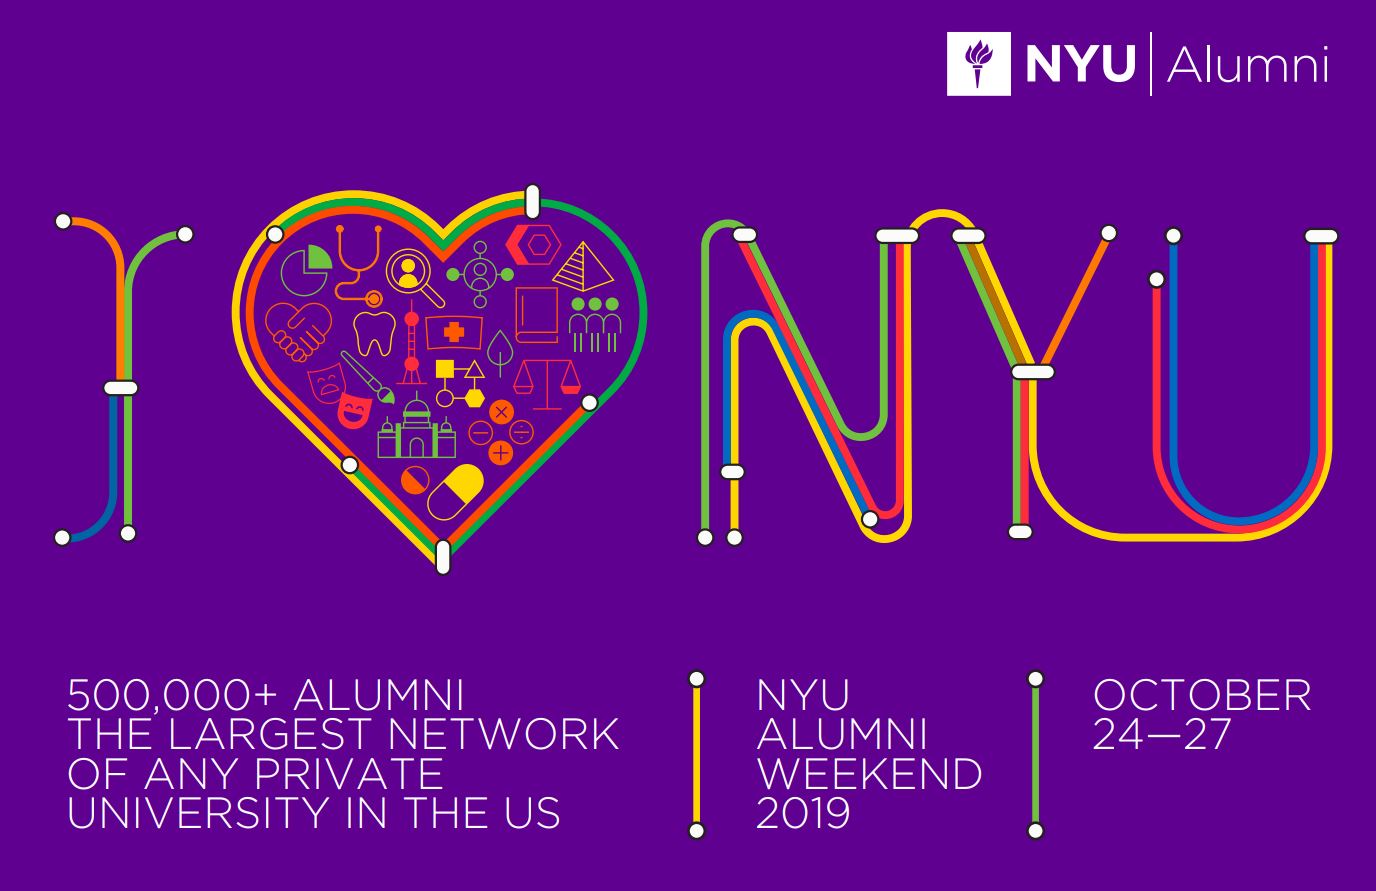 Changing a Tradition: NYU Alumni Weekend Re-envisioned